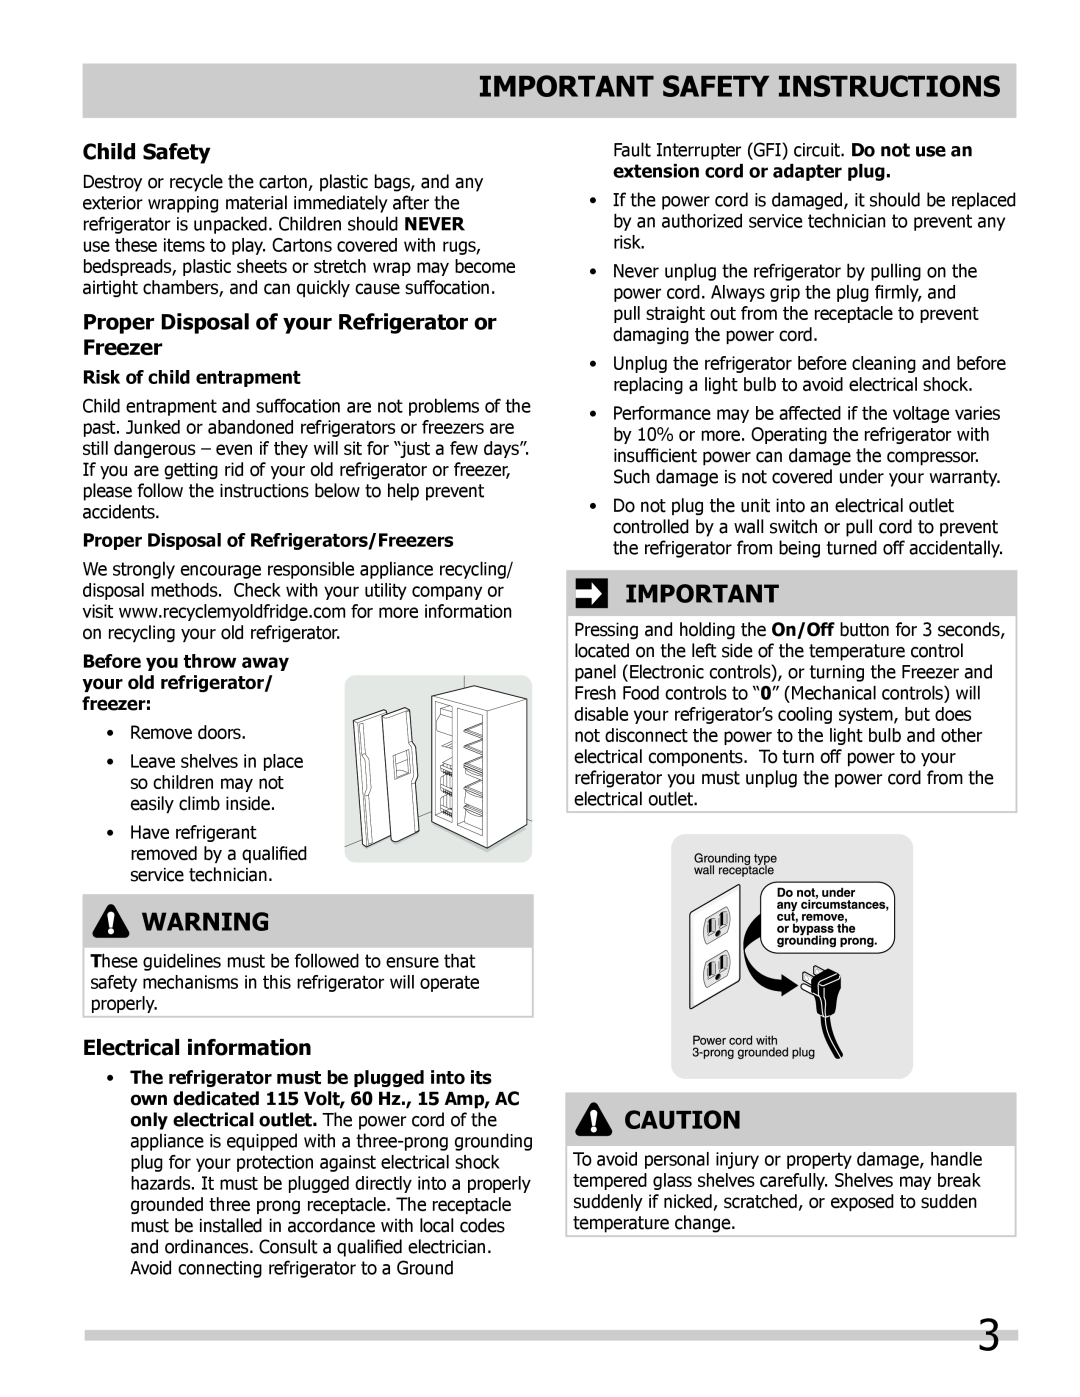 Frigidaire FGHC2335LE, FGHS2332LE Child Safety, Proper Disposal of your Refrigerator or Freezer, Electrical information 